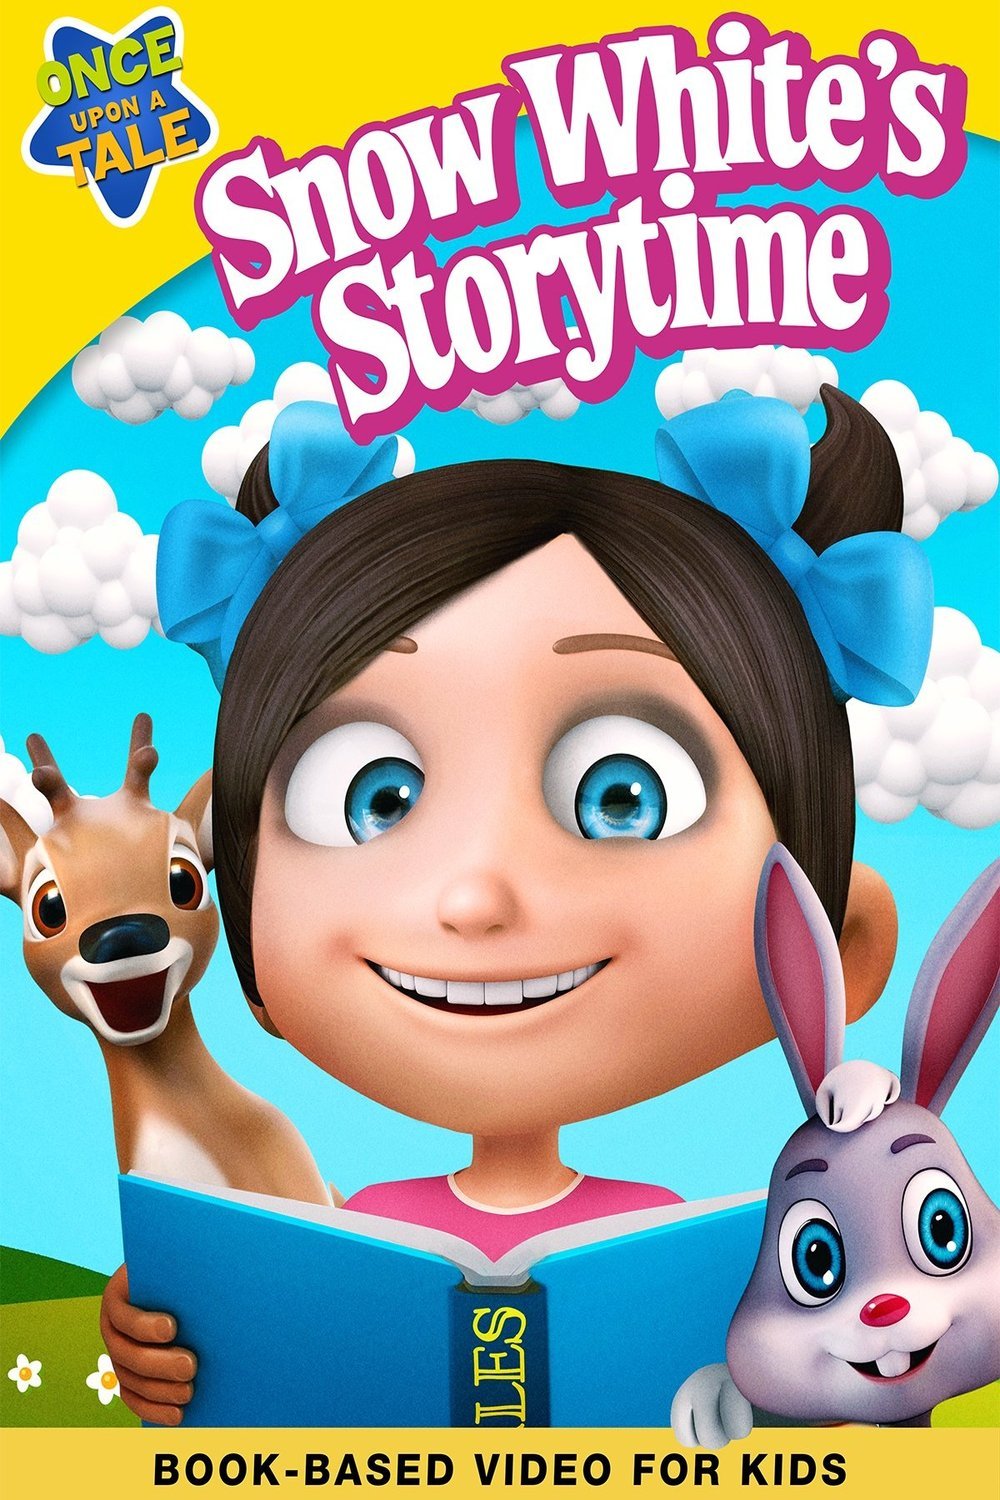 Poster of the movie Snow White's Storytime